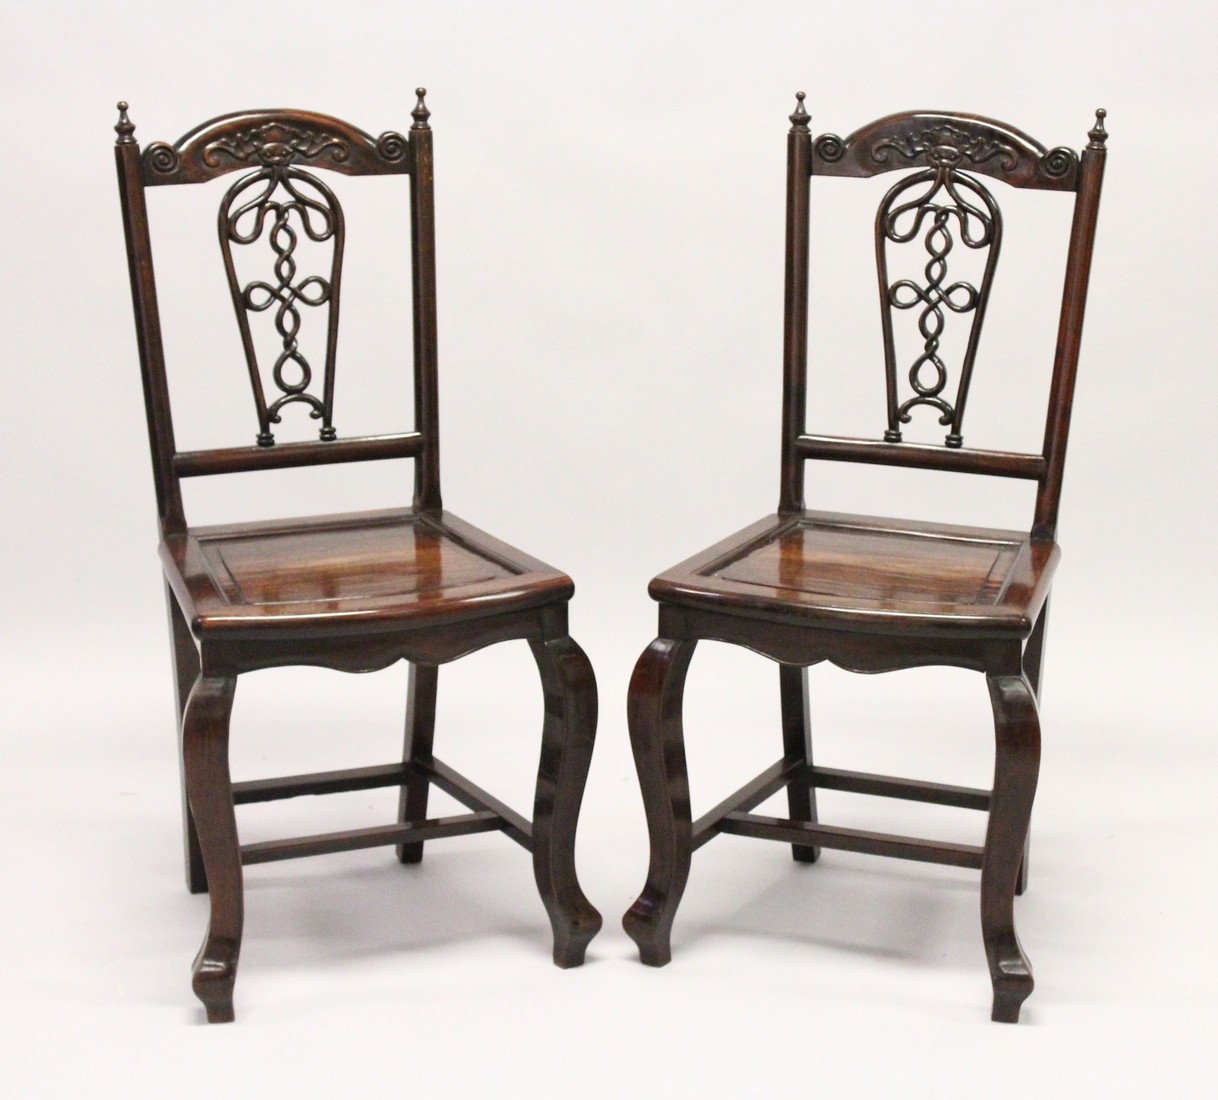 A GOOD PAIR OF 19TH CENTURY REDWOOD CHINESE CHAIRS with pierced backs and solid seats on curving